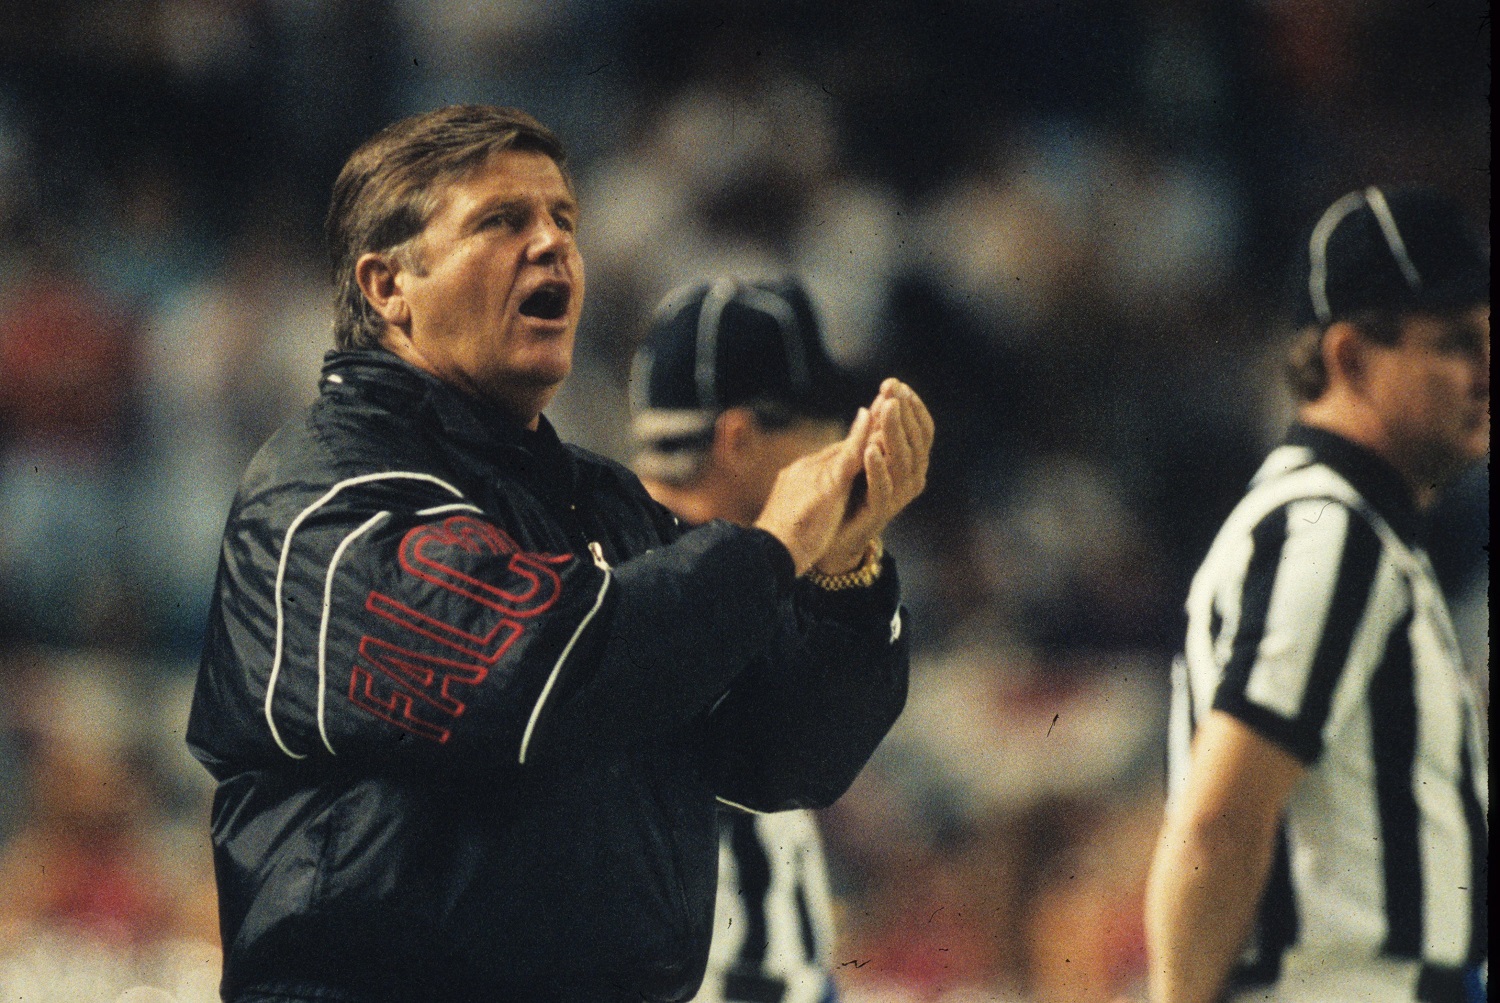 Head coach Jerry Glanville of the Atlanta Falcons encourages his players from the sideline against the New York Jets in the Georgia Dome on Sept. 6, 1992.